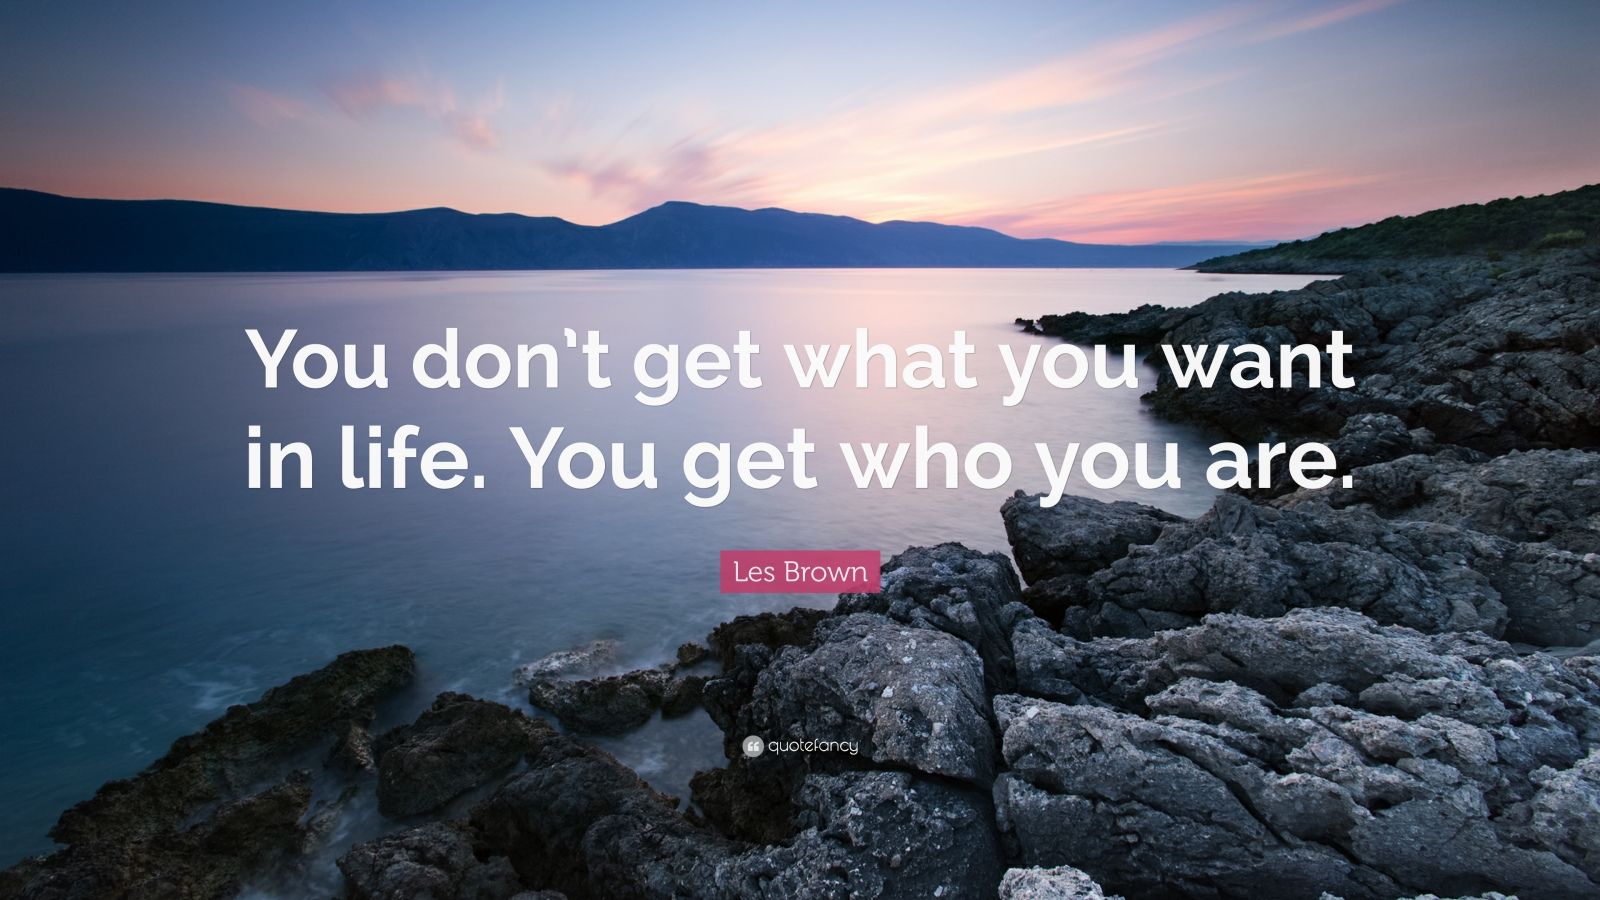 Les Brown Quote “You don t what you want in life